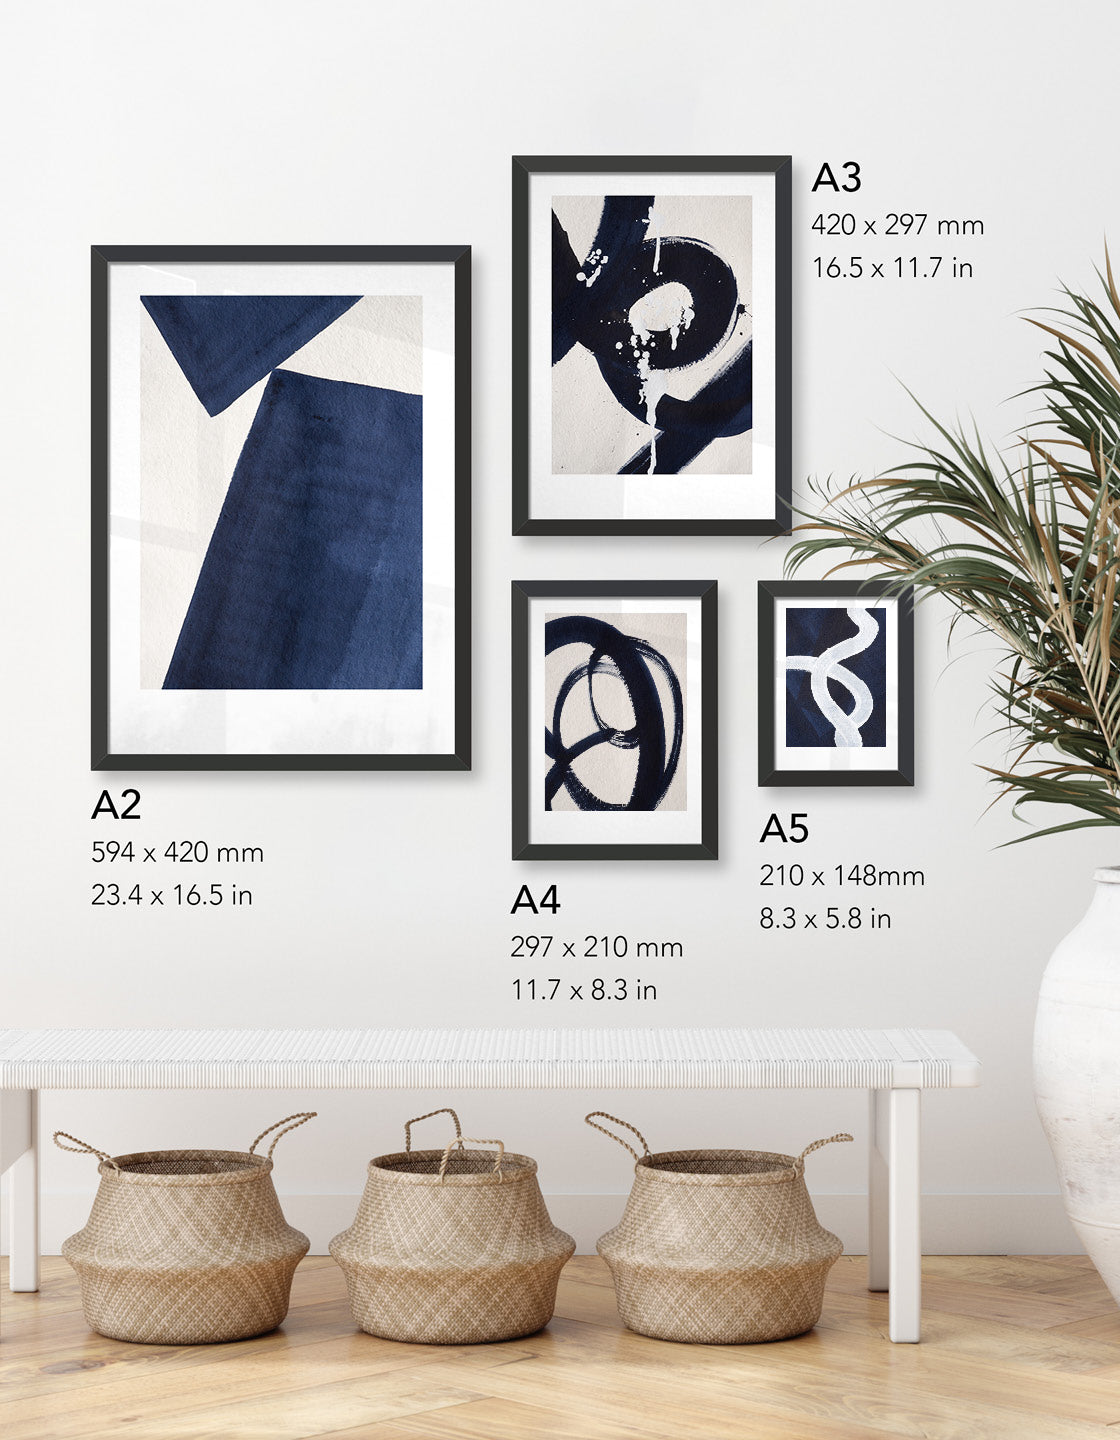 image depicting four different size prints available in the Japandi collection; A5, A4, A3 and A2